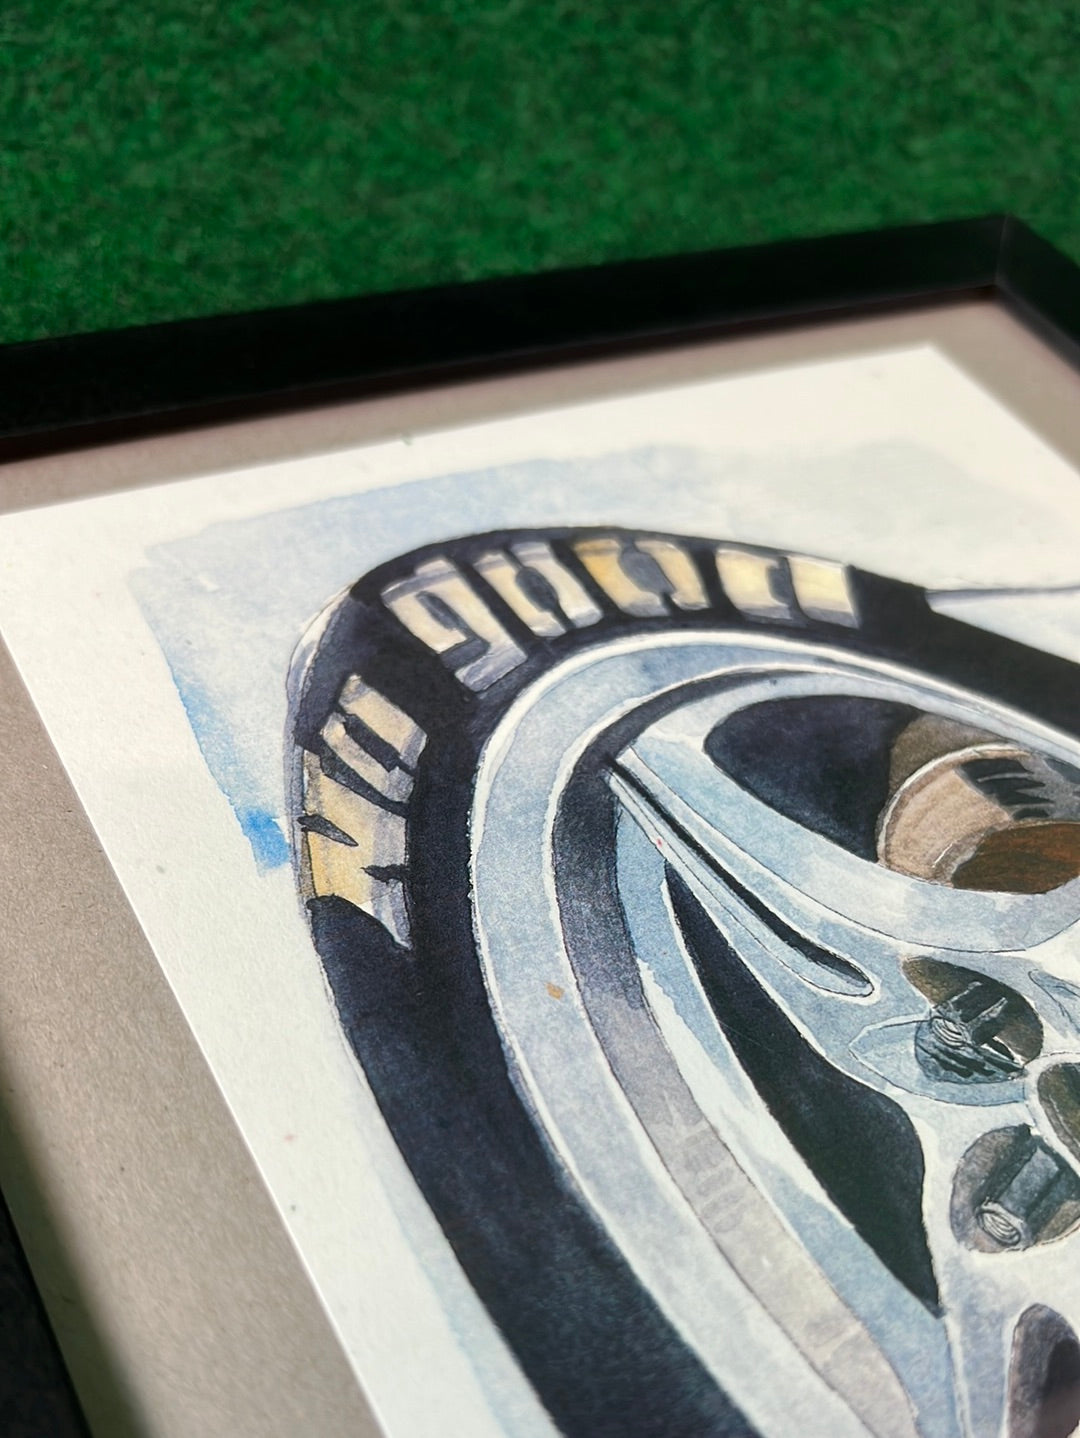 SSR Type X (No Good Racing Tire Letters) - Framed, Hand Drawn, Watercolor Painted & Signed Print by UNDERDOGZ